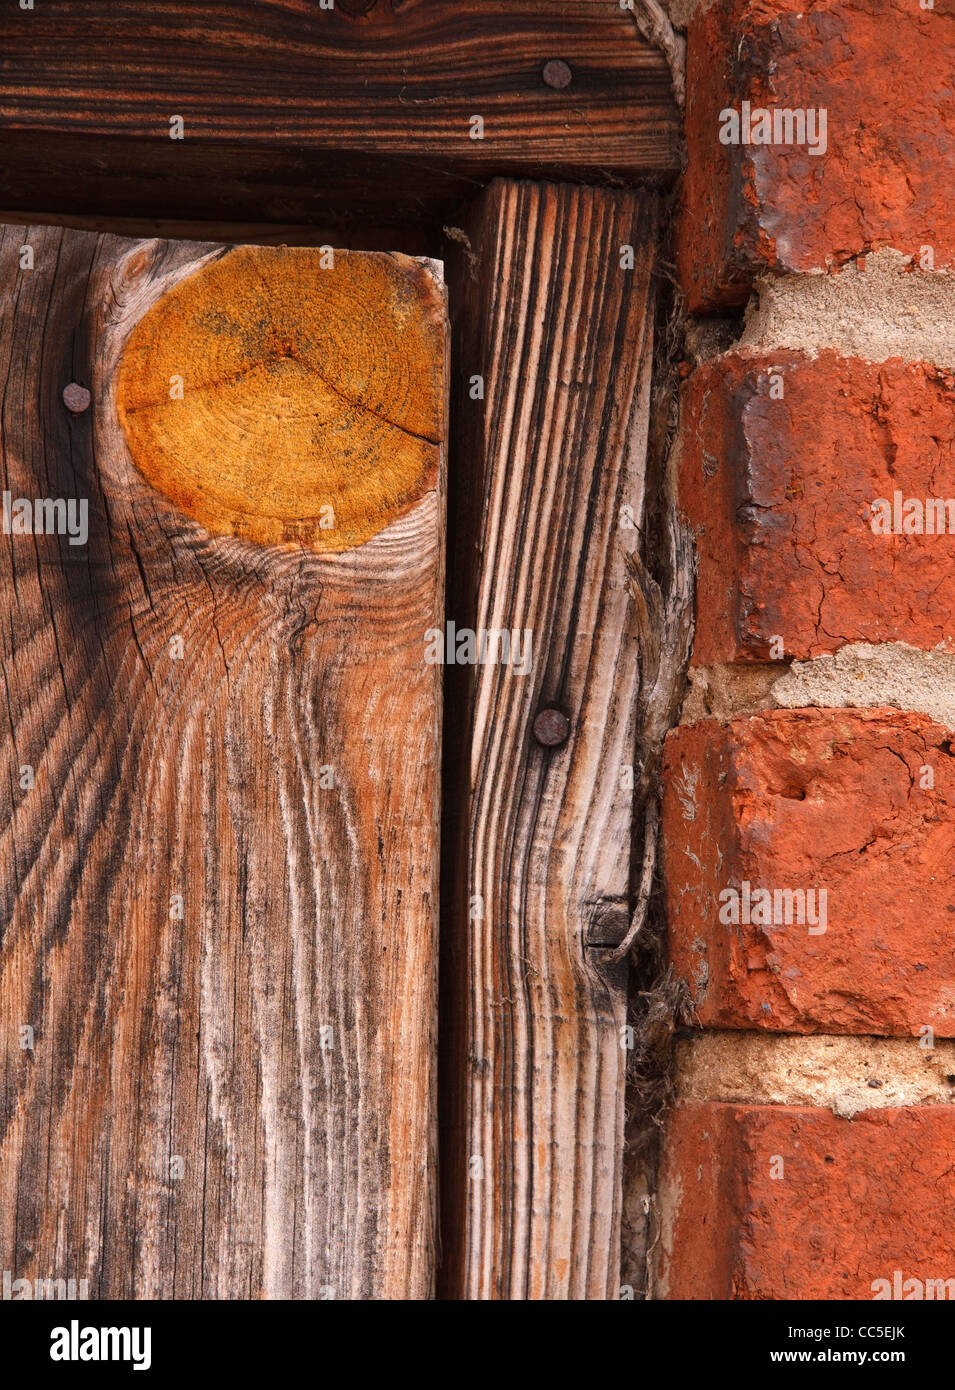 Colourful old wood grain and knot detail, Lincolnshire, England, UK Stock Photo